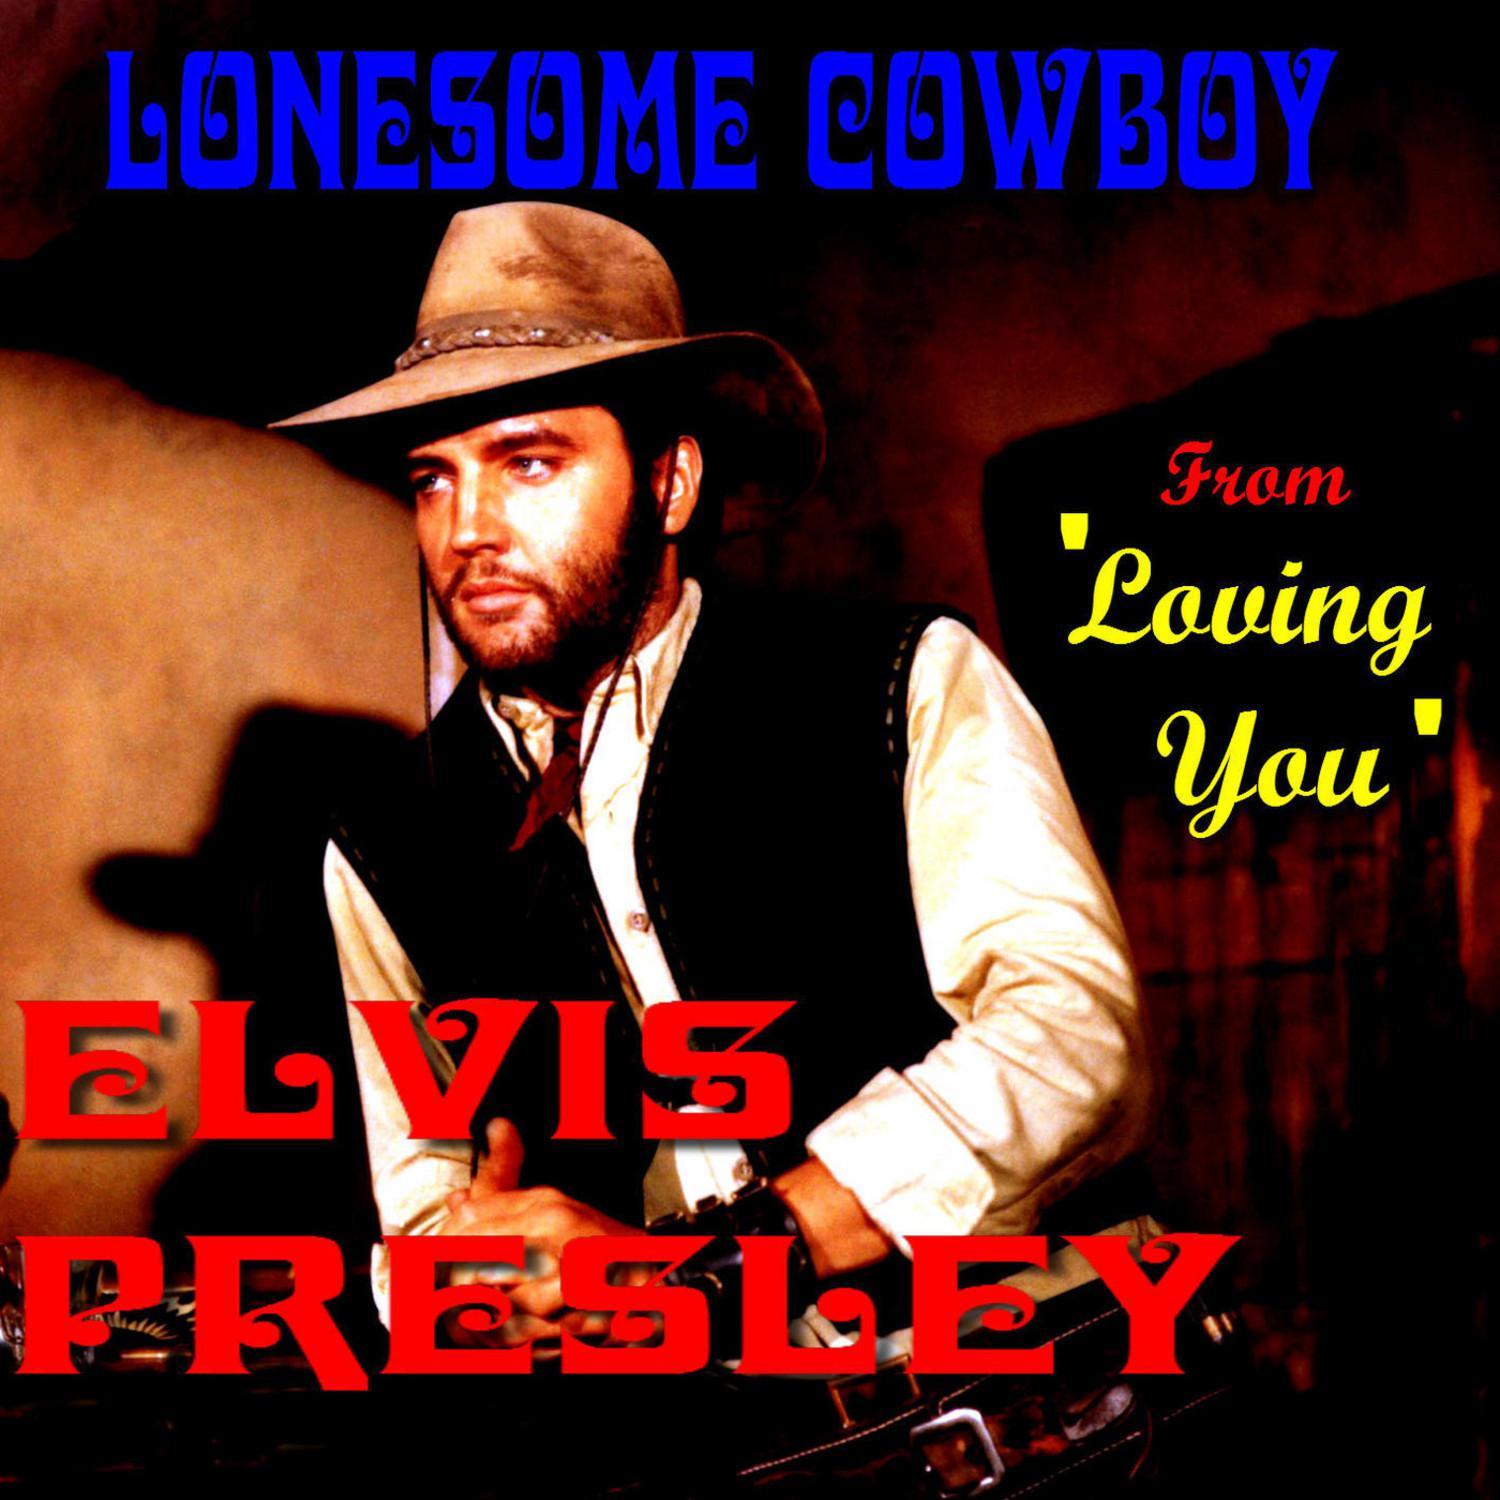 Lonesome Cowboy (From 'Loving You')